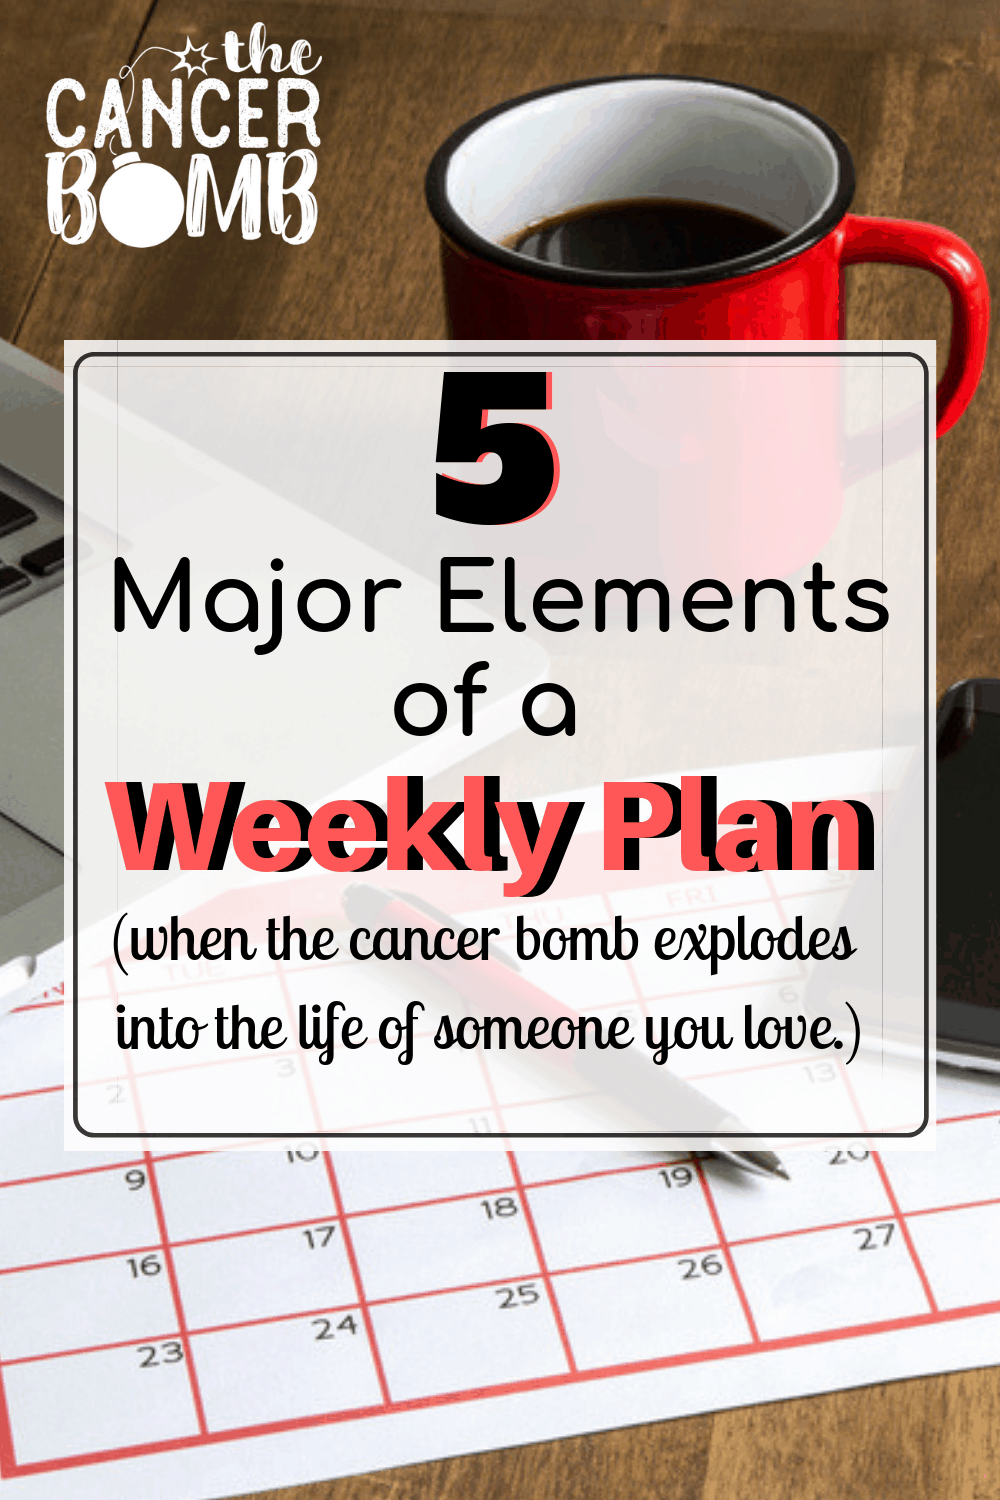 When you are helping your loved one battle cancer you need tips and ideas to make EVERY SINGLE MINUTE COUNT. So, grab your planner or (a free printable) and start mapping out the week. The more you can plan ahead, the better! #cancerchangeseverything #getorganized #manageyourlifetoo #strategiesthatwork